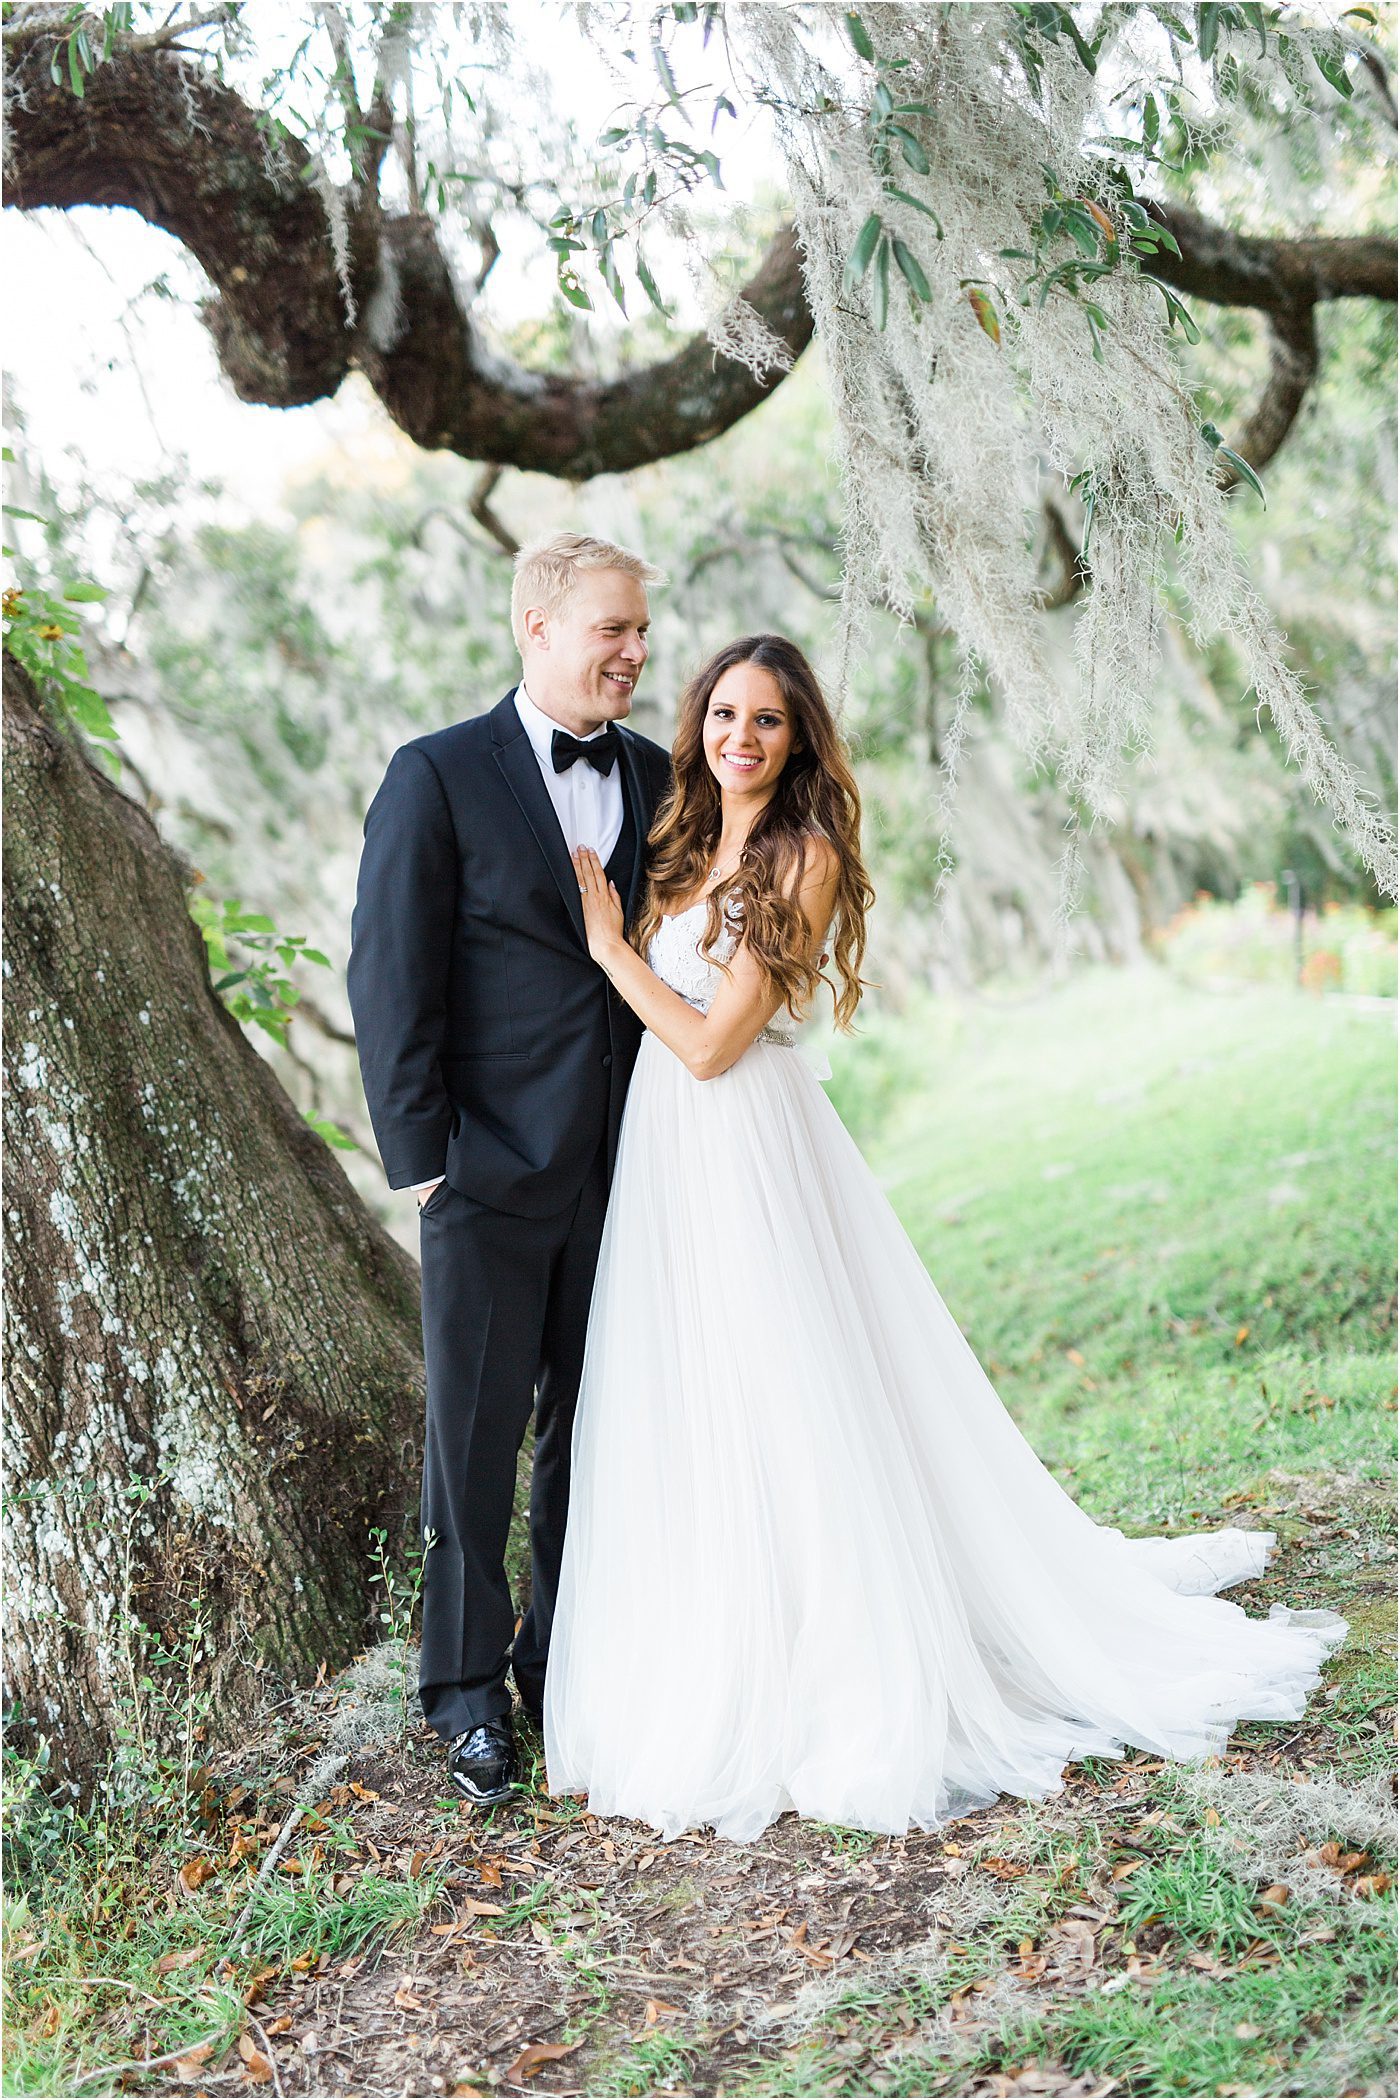 Dusty Blue Charleston Elopement at Magnolia Plantation by Catherine Ann Photography